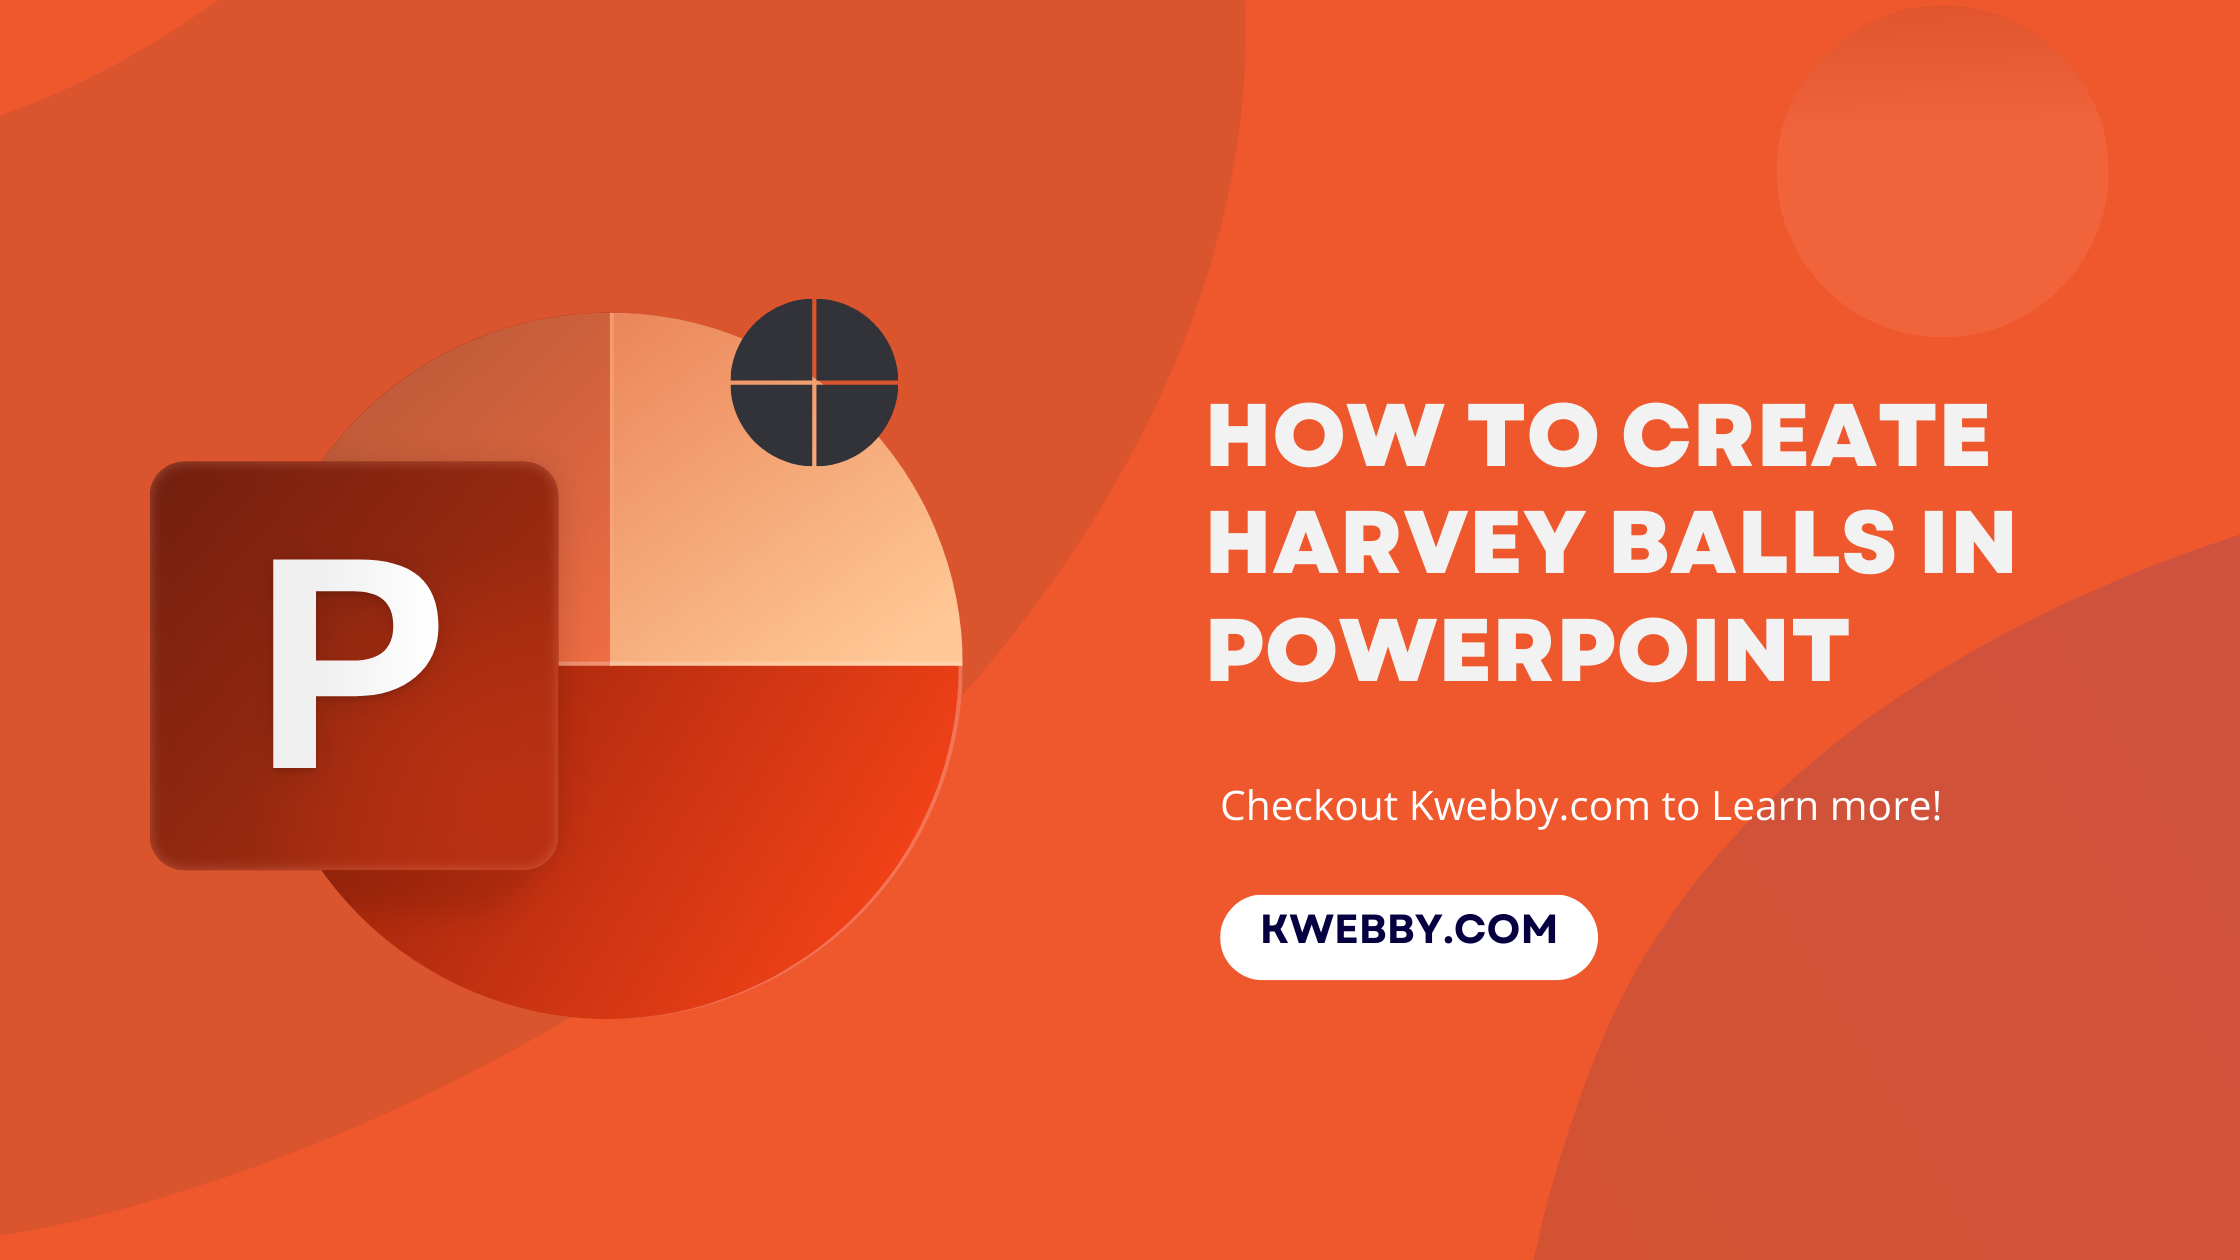 How to create Harvey balls in PowerPoint